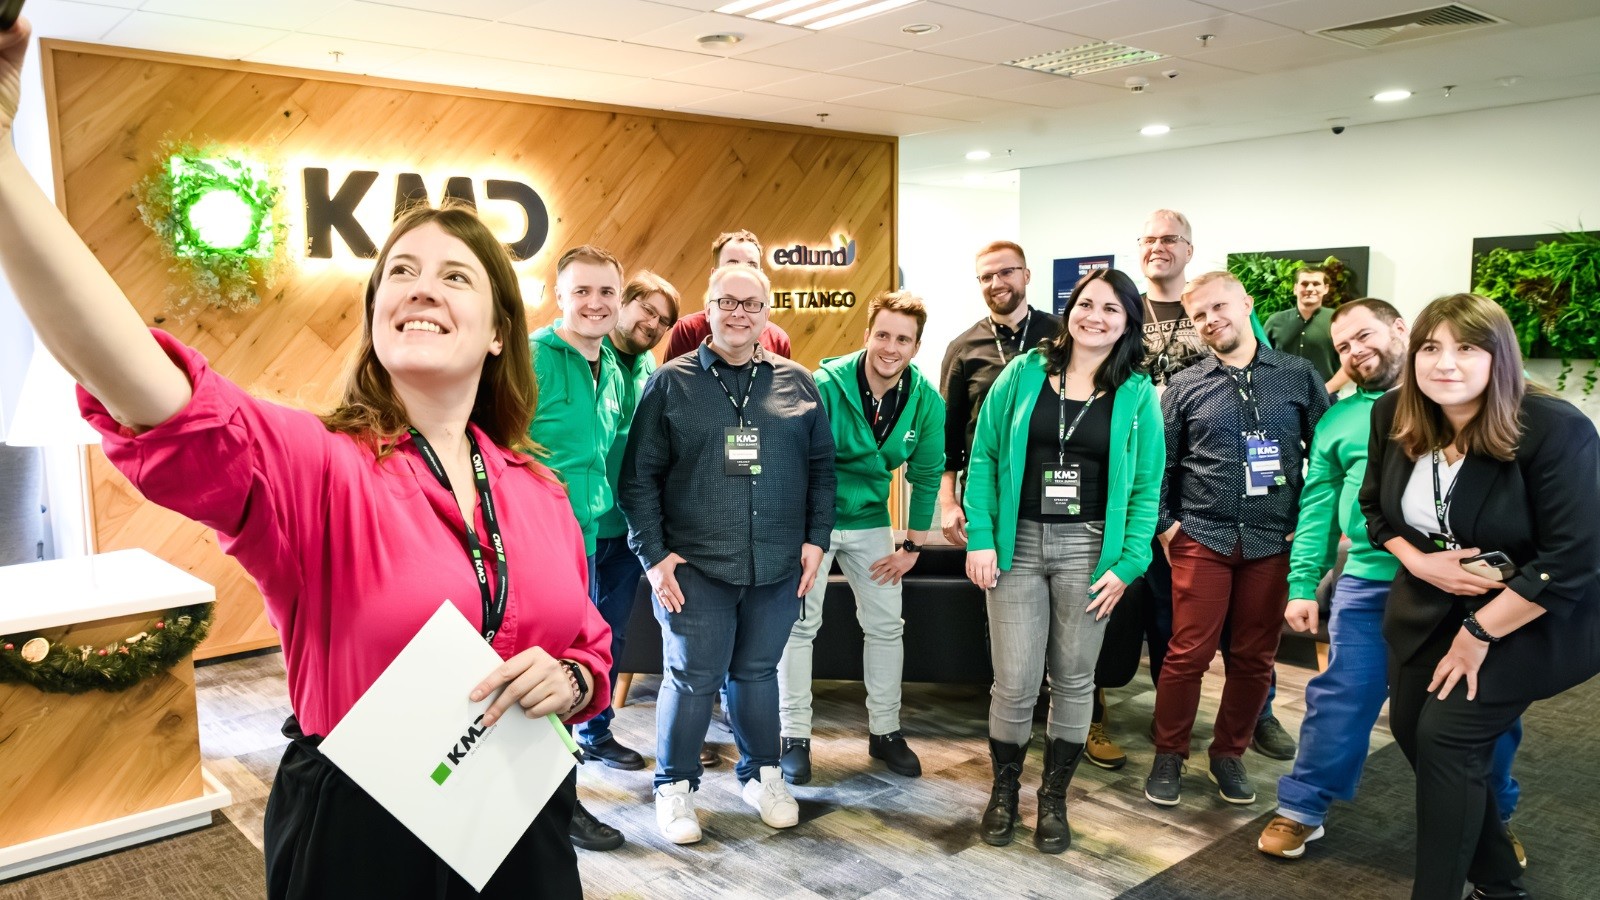 KMD Poland workers in the office standing in a crowd posing for a colleague taking a selfie